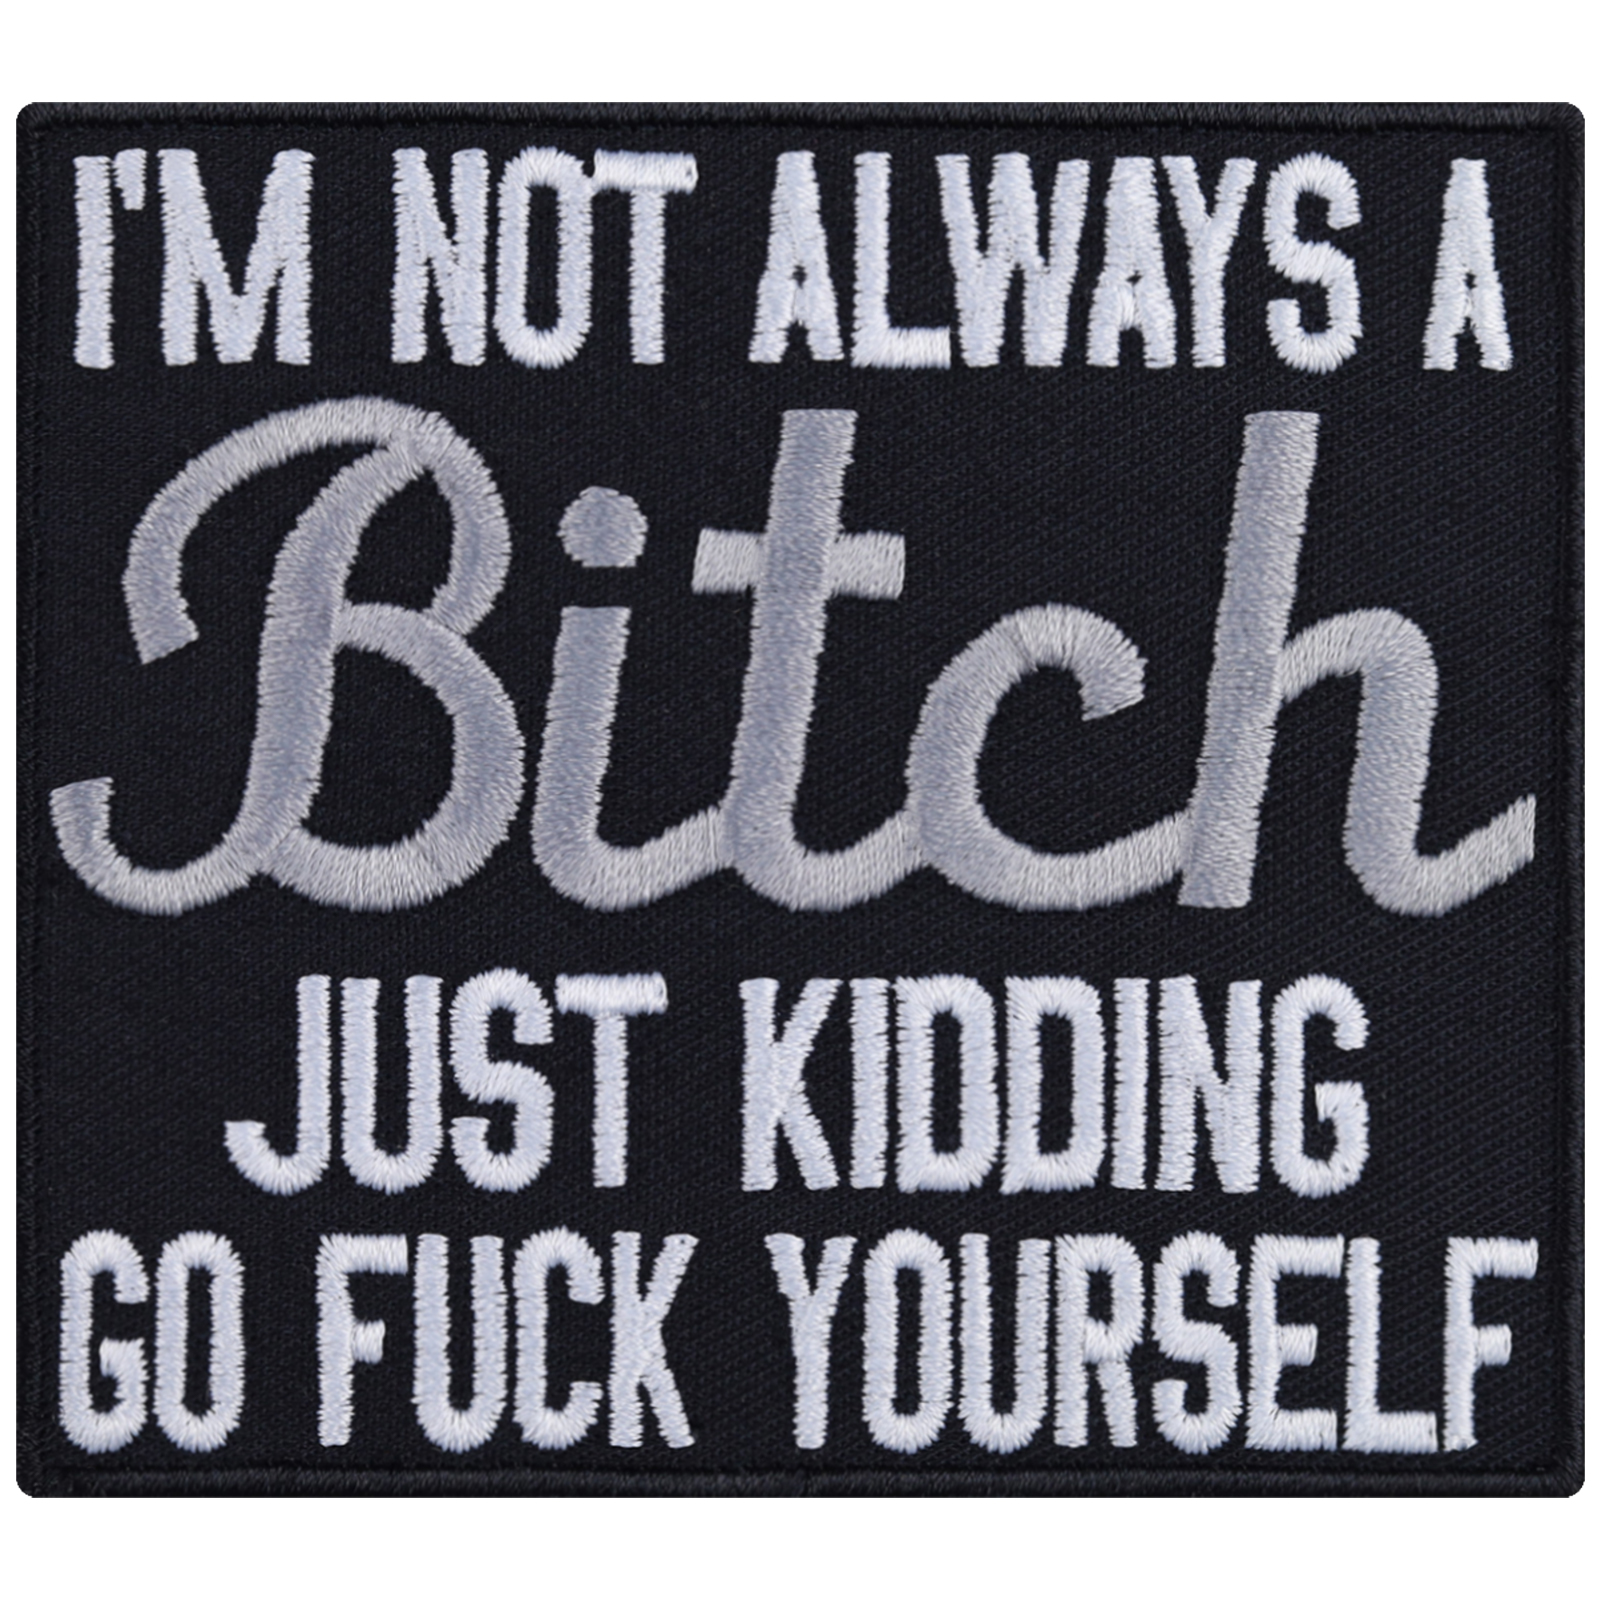 I'm not always a bitch (Just kidding - Go fuck yourself) - Patch